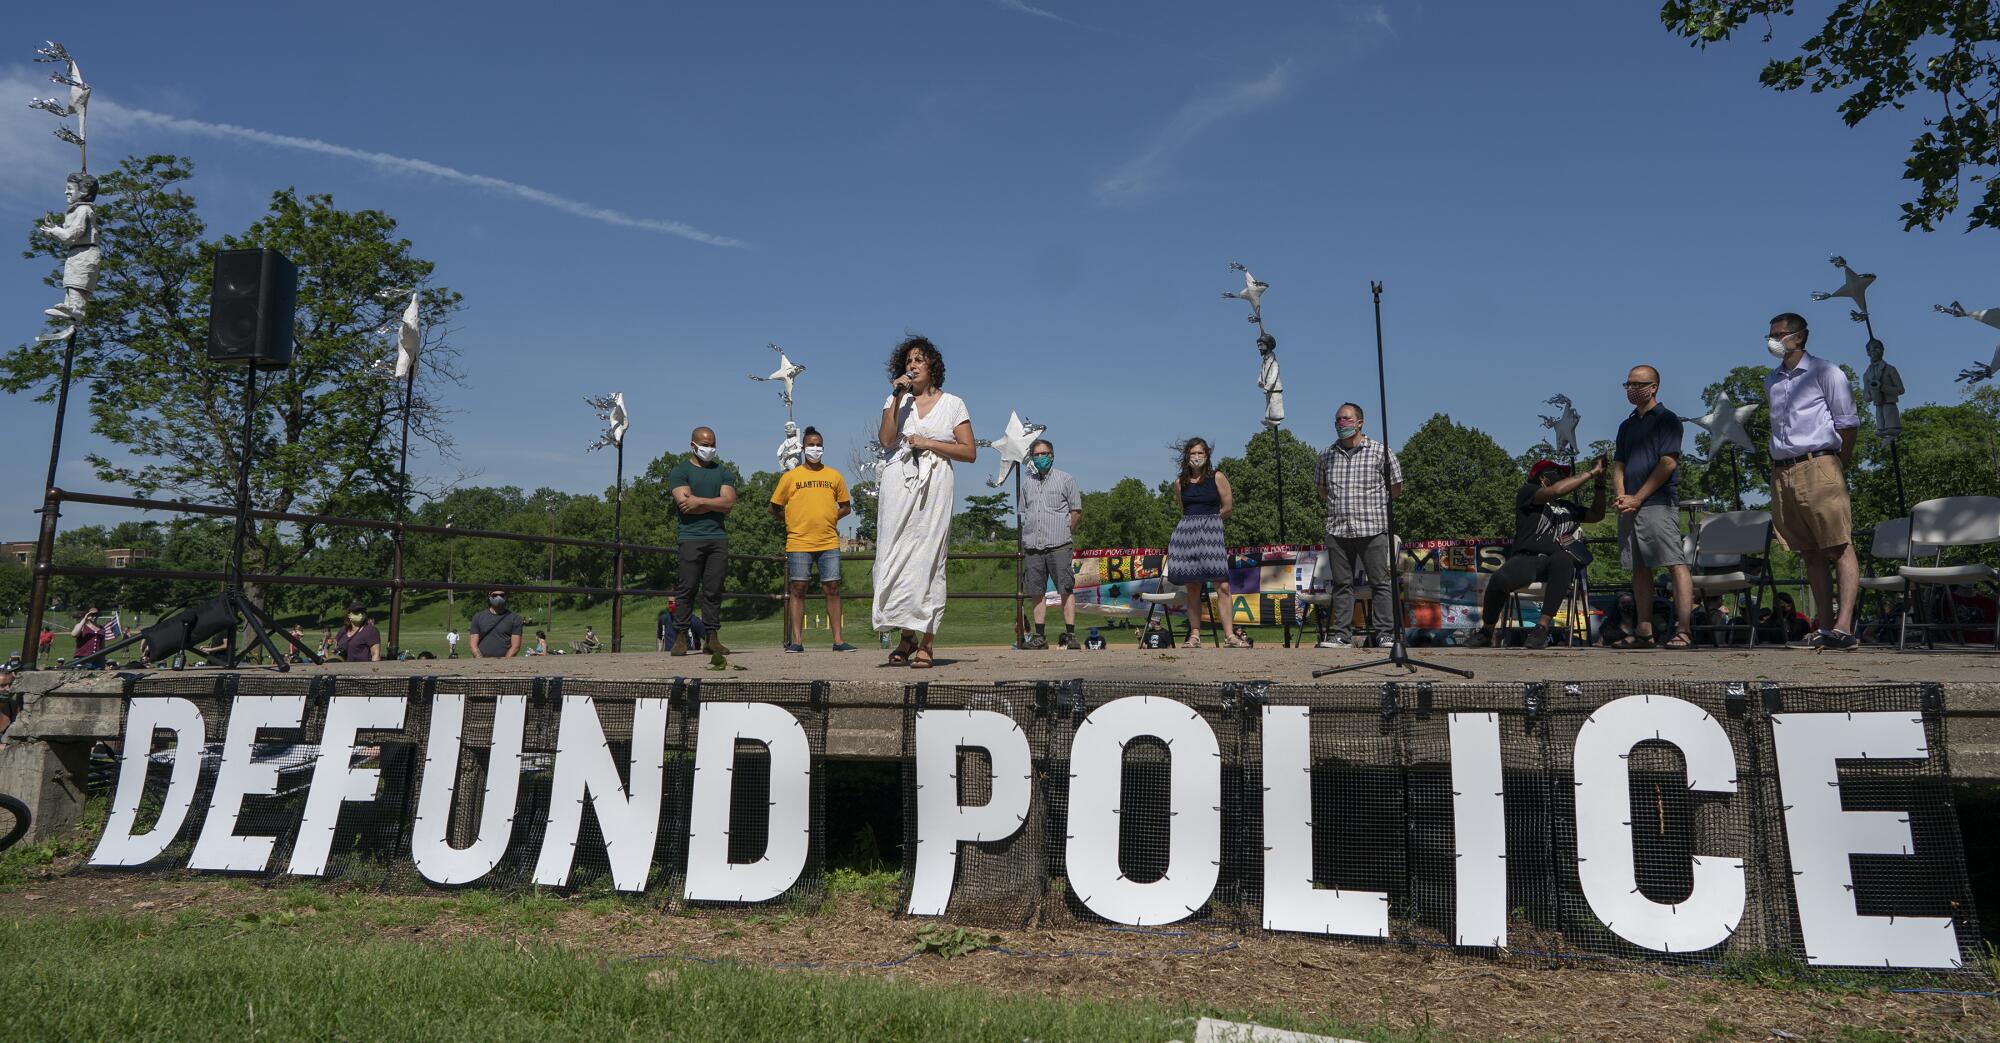 A speaker stands before a "Defund Police" sign